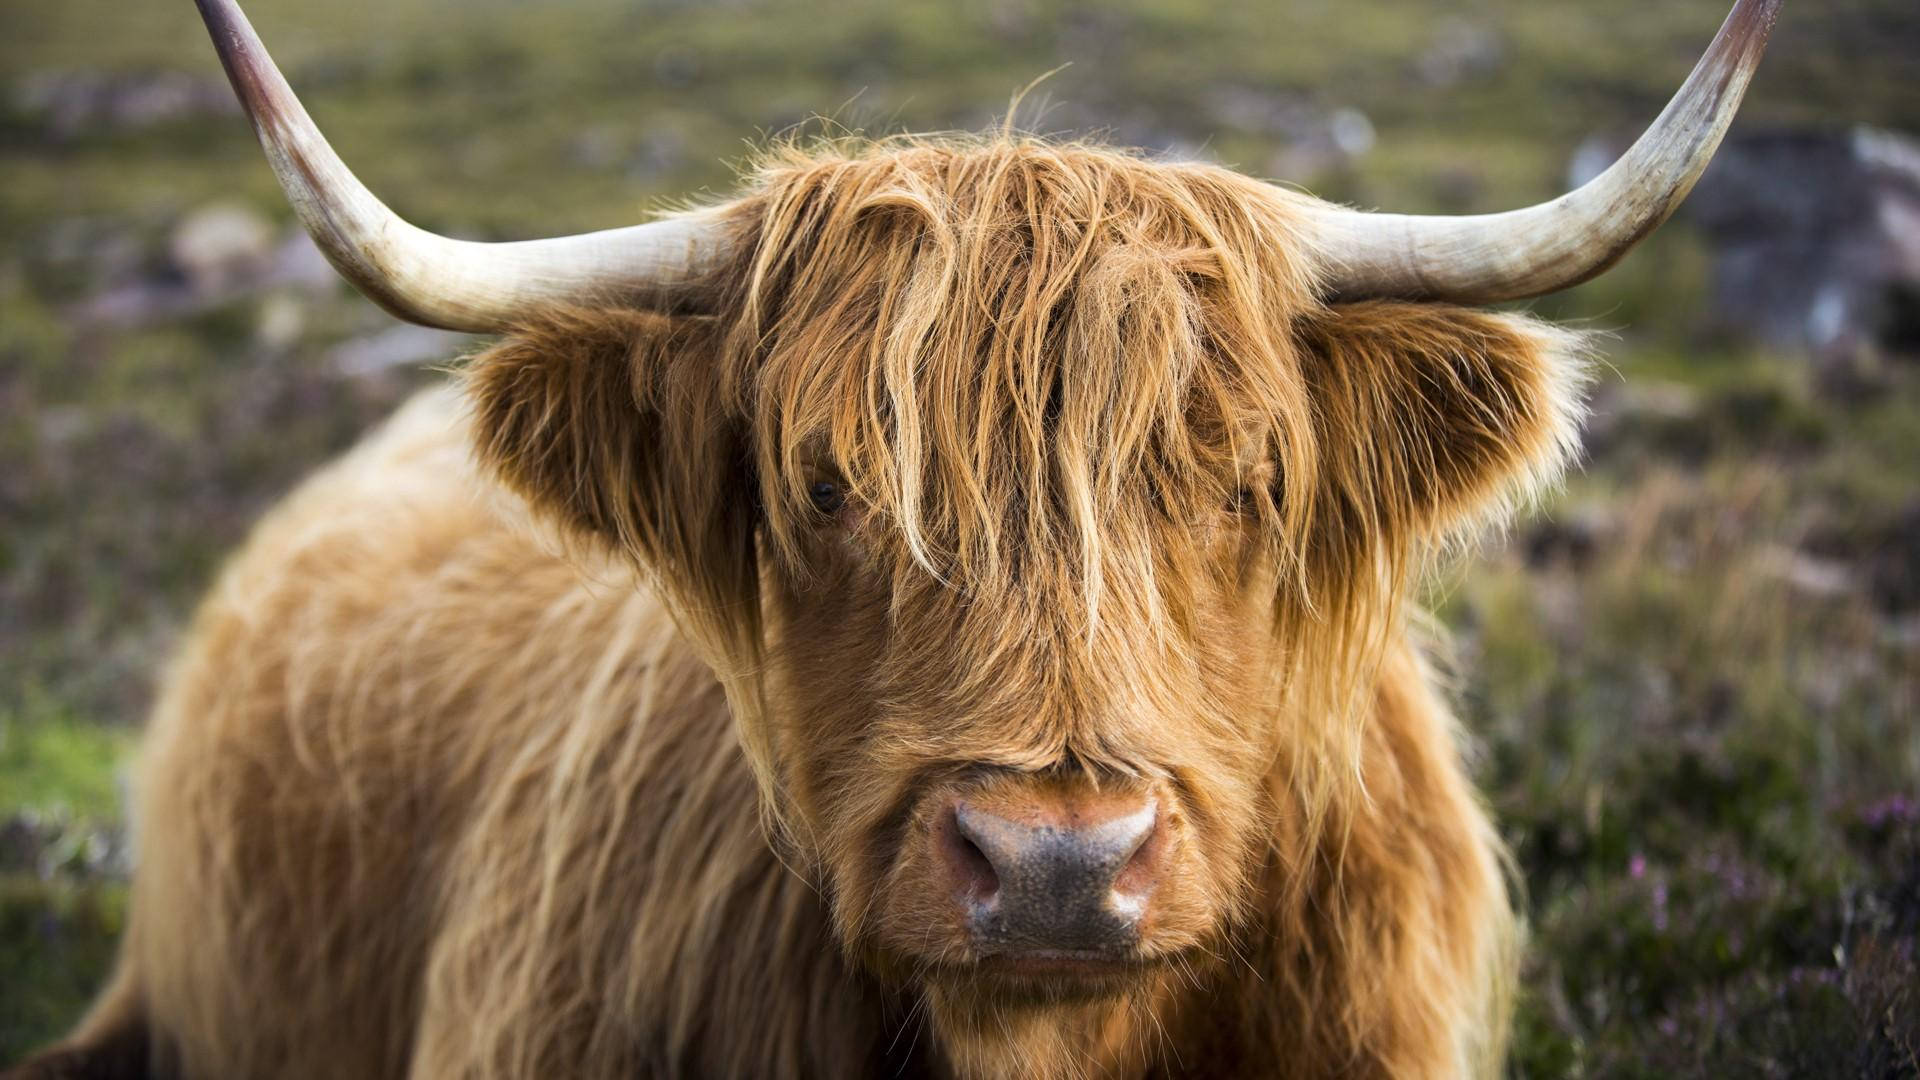 Majestic Highland Cow in the Wild Wallpaper